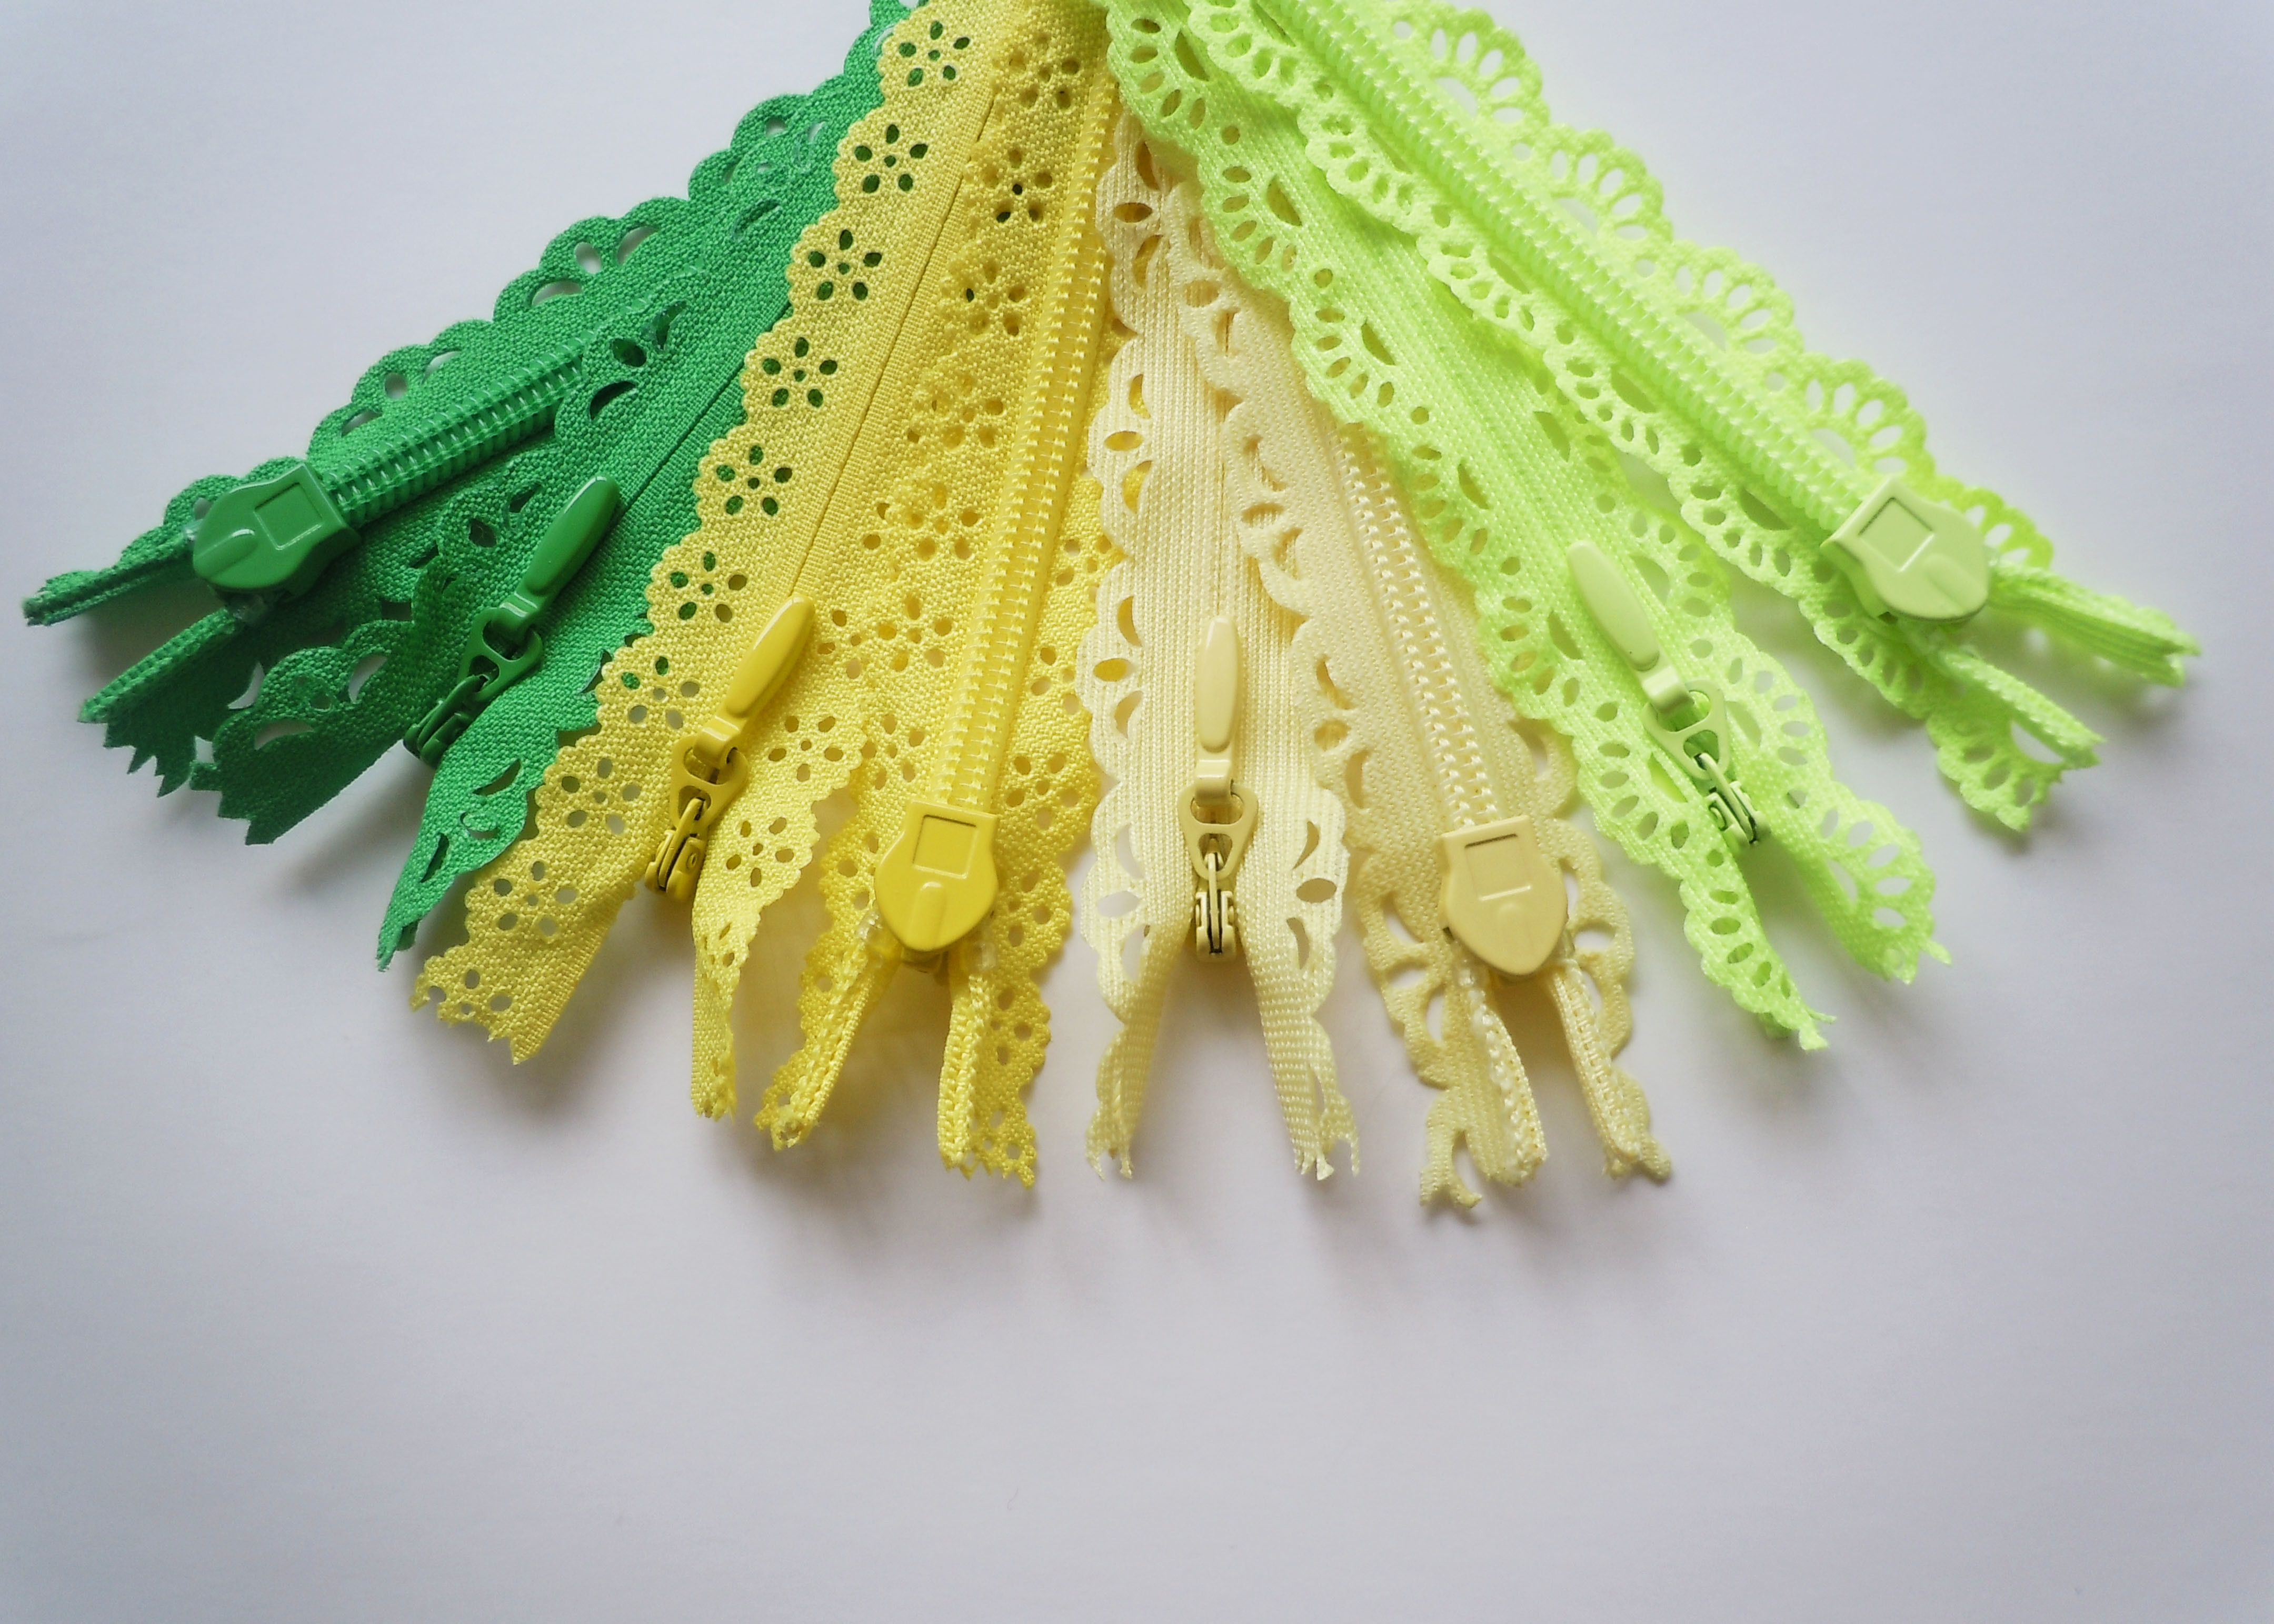  Custom Length Double Sided Sewing Notions Zippers , Nylon Lace Zipper For Clothes Manufactures